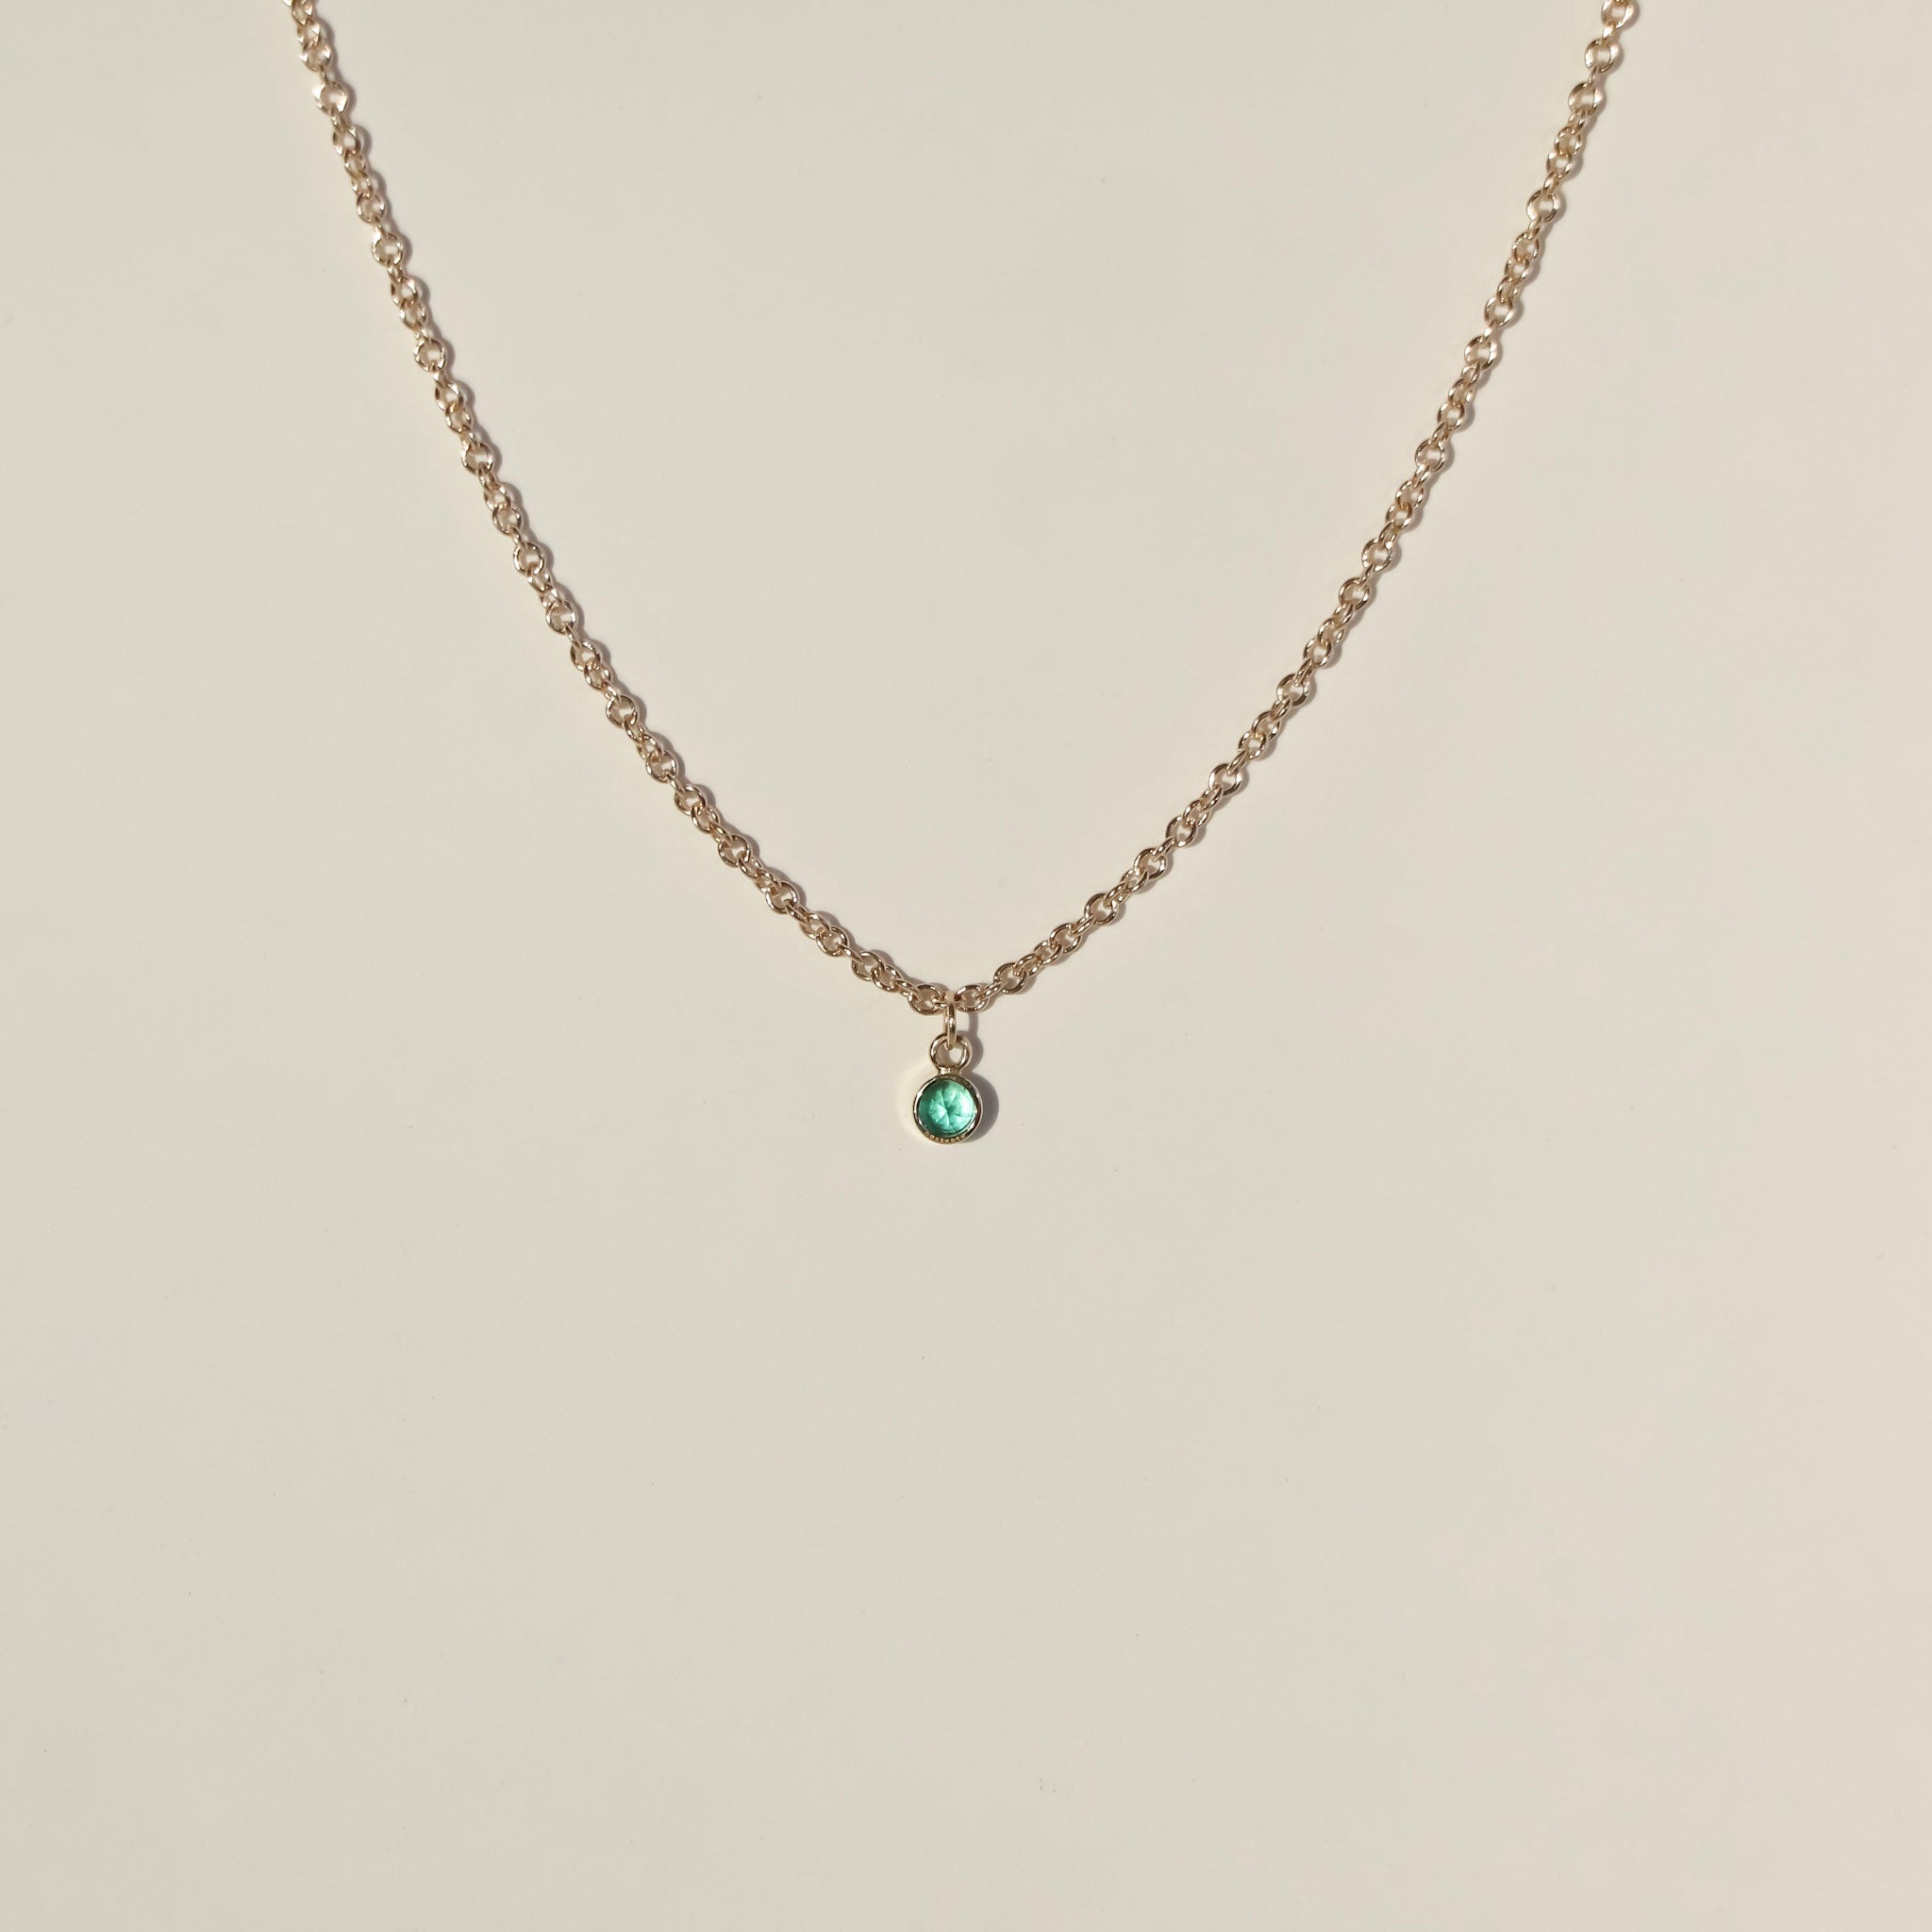 5.24tcw Emerald Oval Solitaire Pendant Necklace 14K